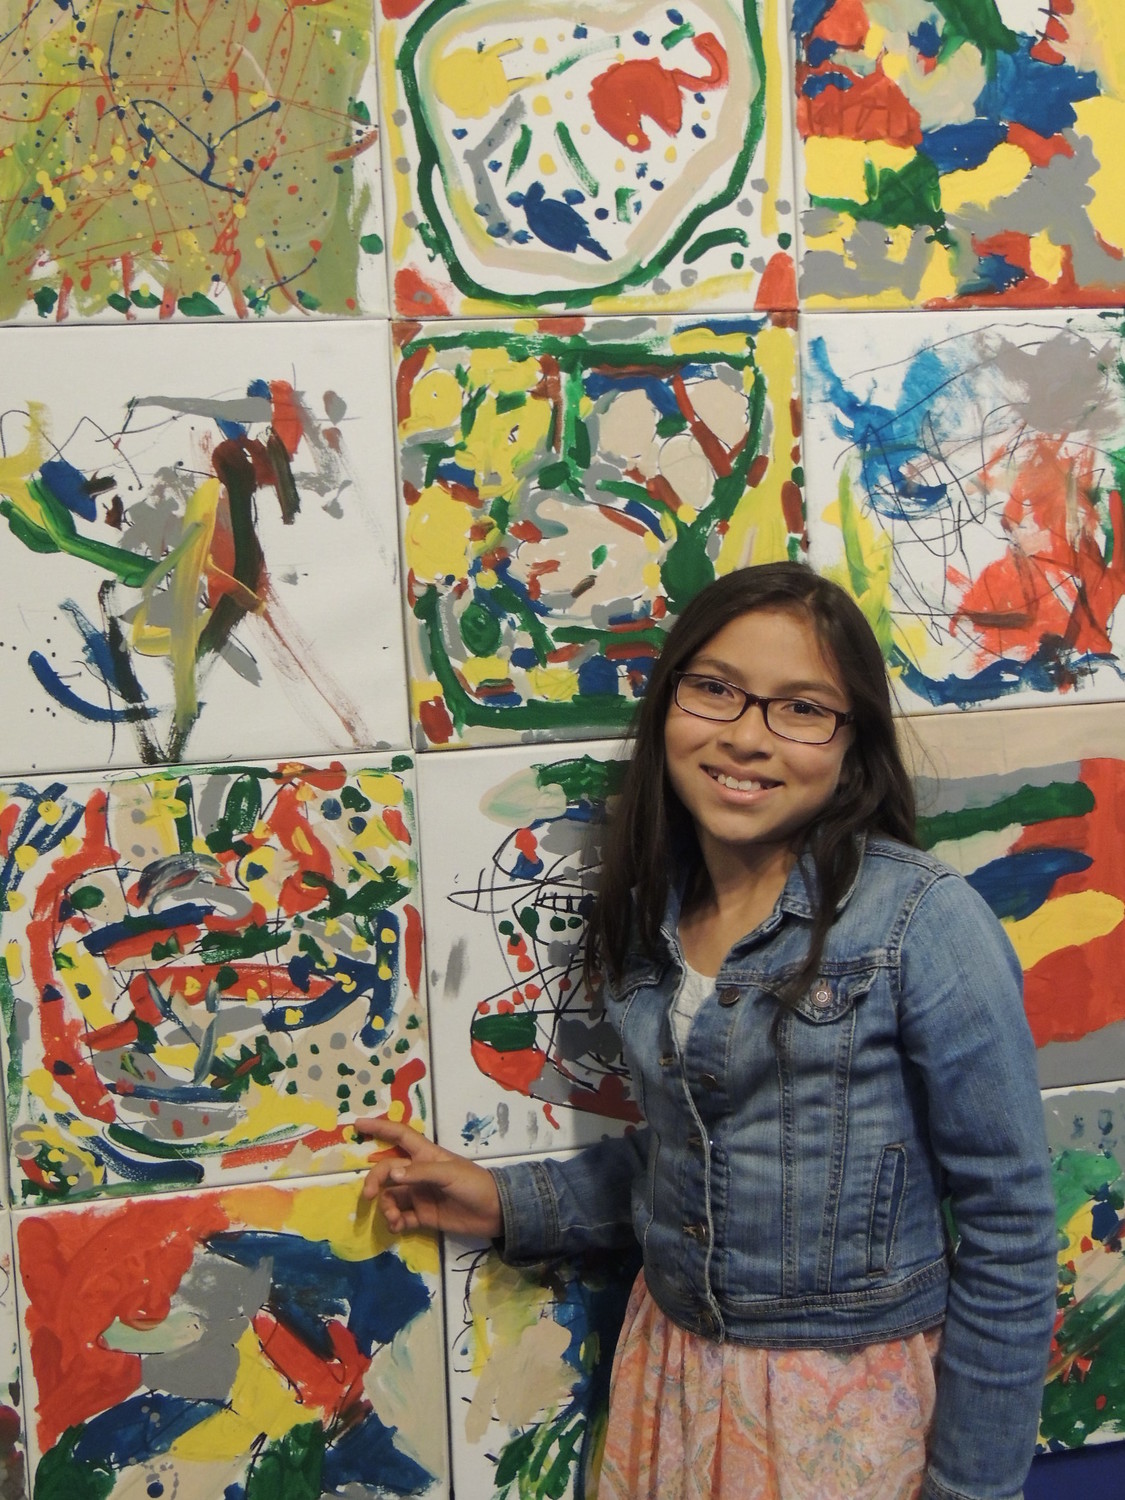 Teens create abstract art as part of the de Kooning initiative during sessions held in libraries across Nassau County.